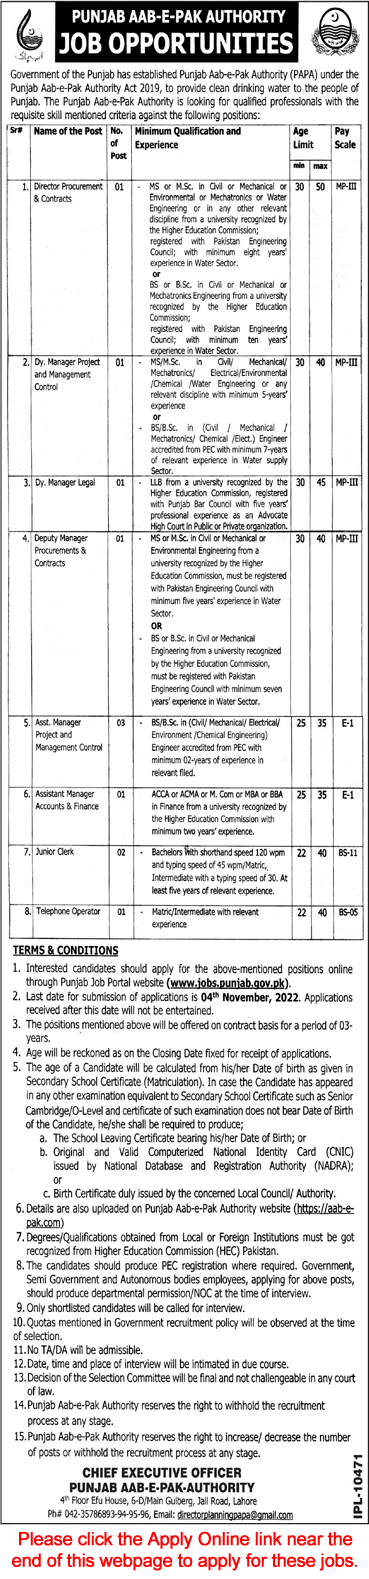 Punjab Aab e Pak Authority Jobs October 2022 Apply Online Deputy Managers & Others Latest